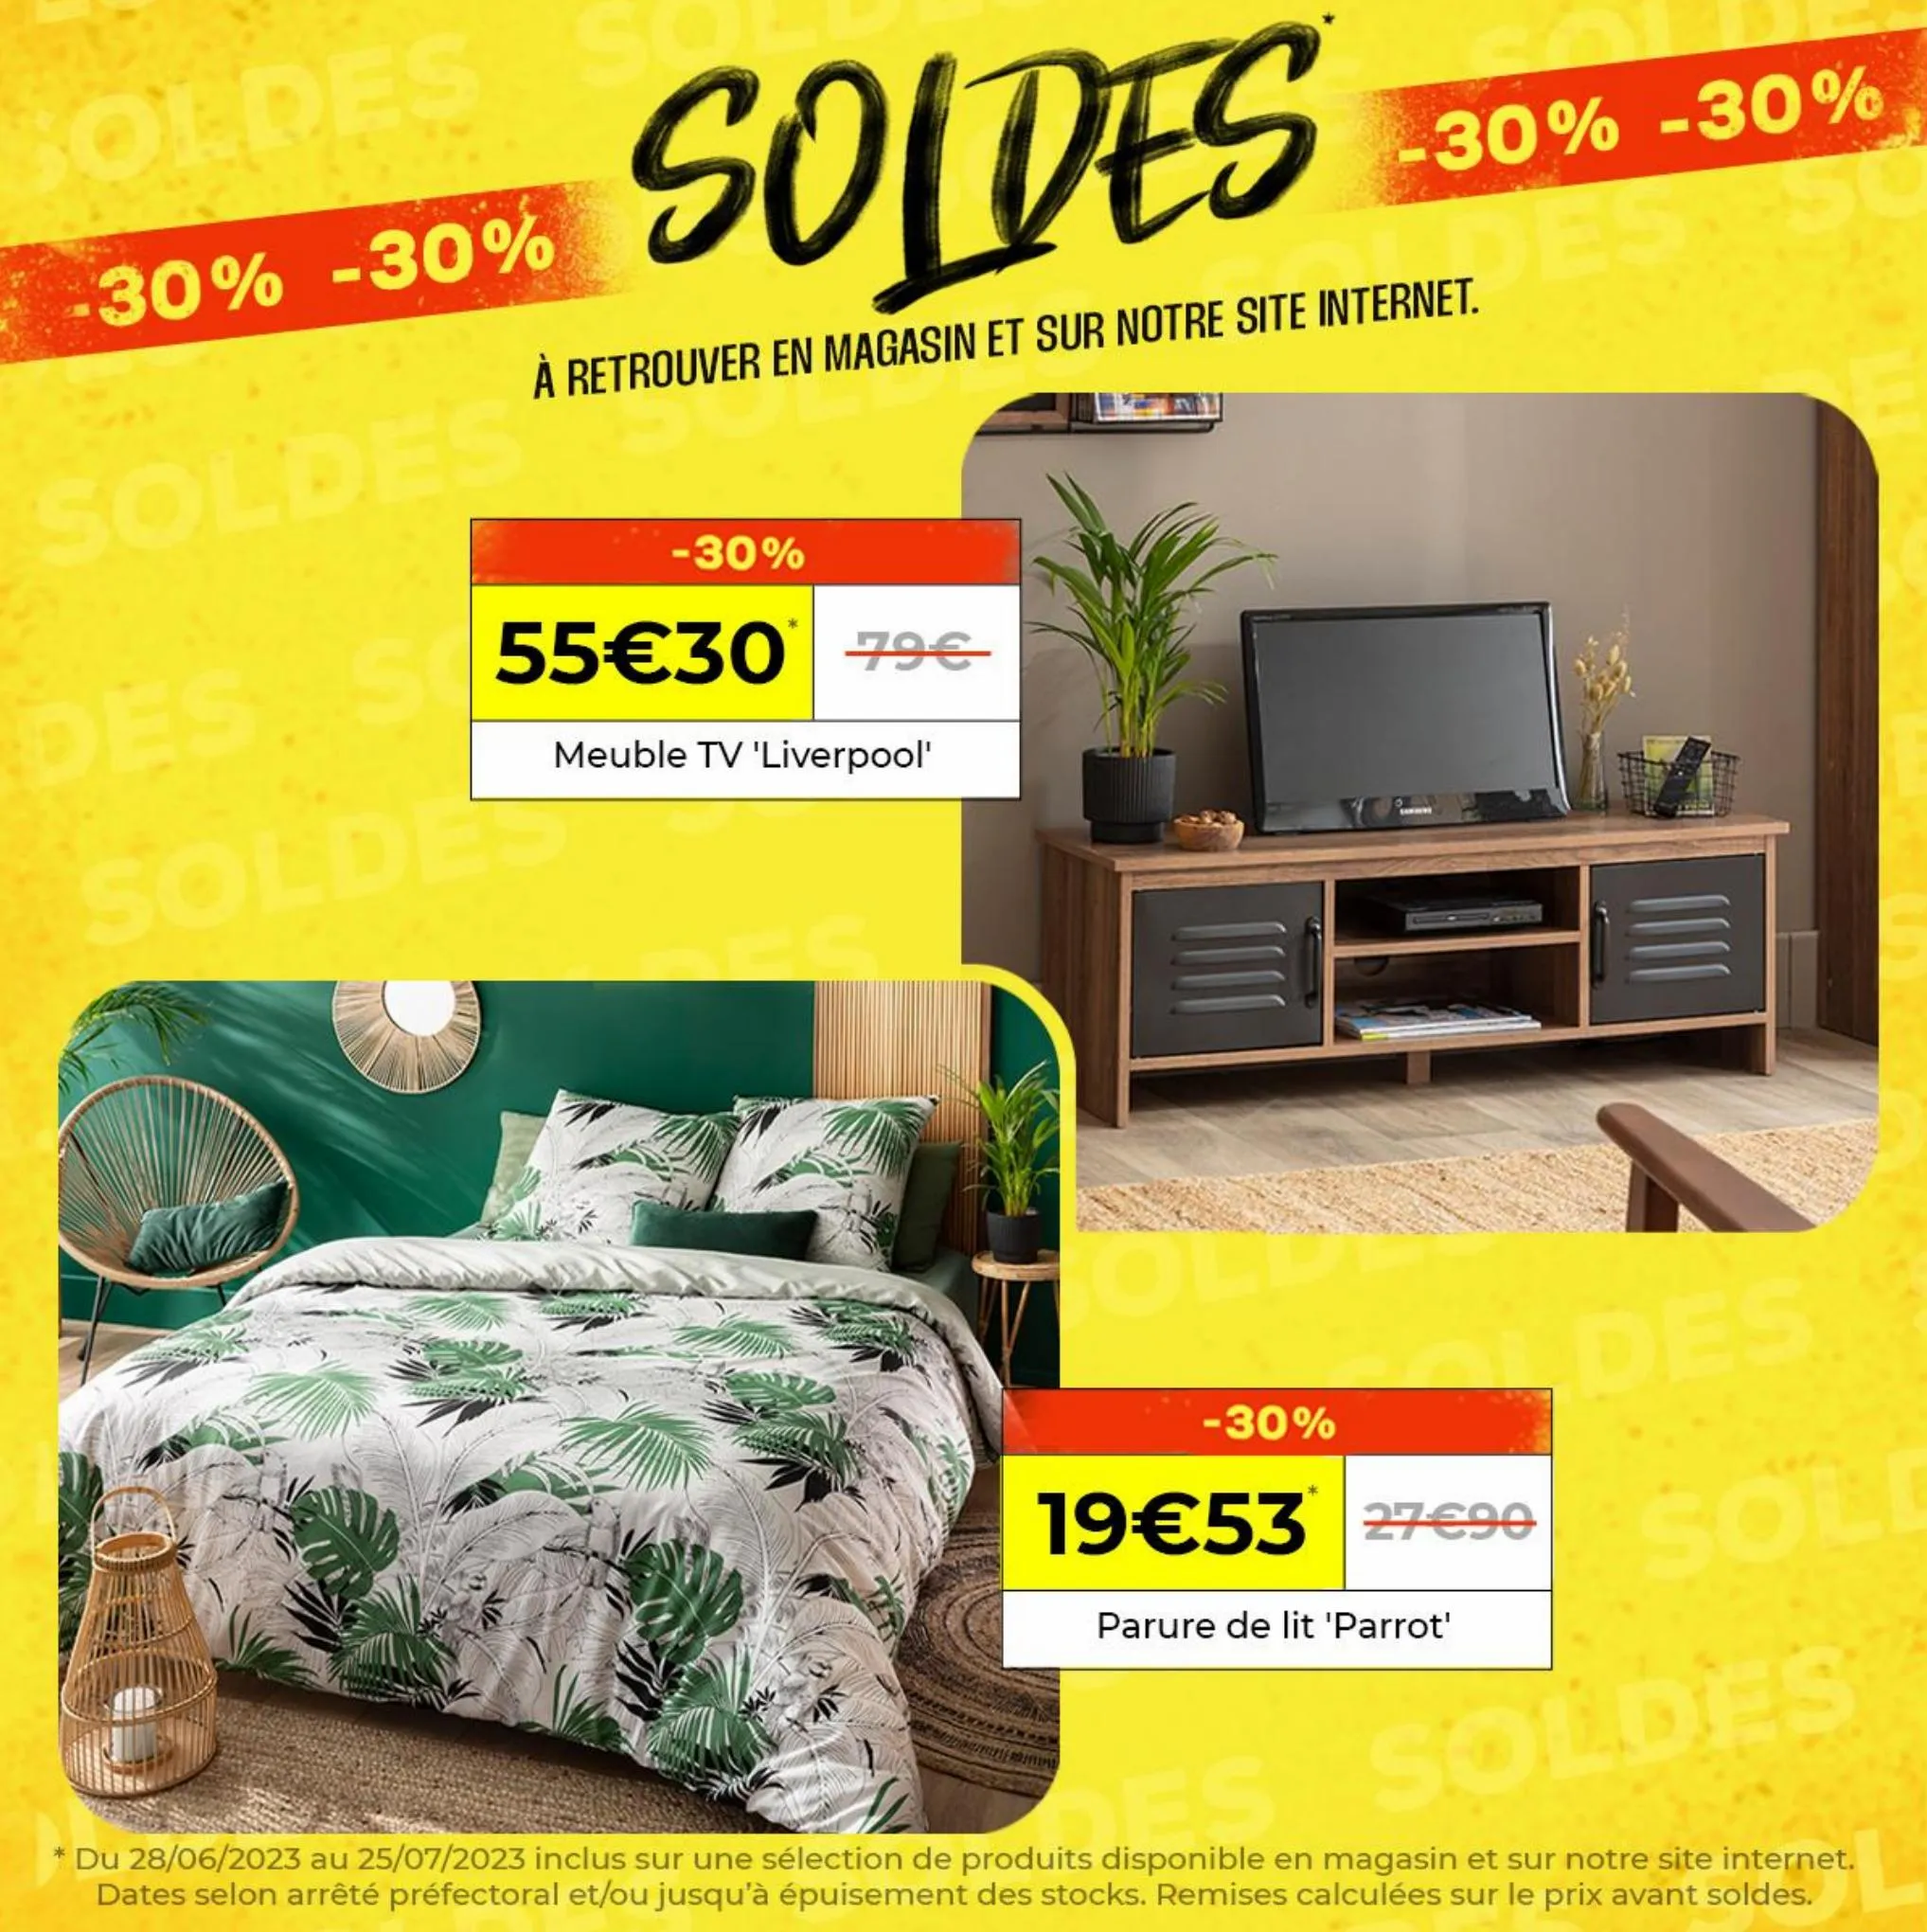 Catalogue L'incroyable Soldes, page 00004